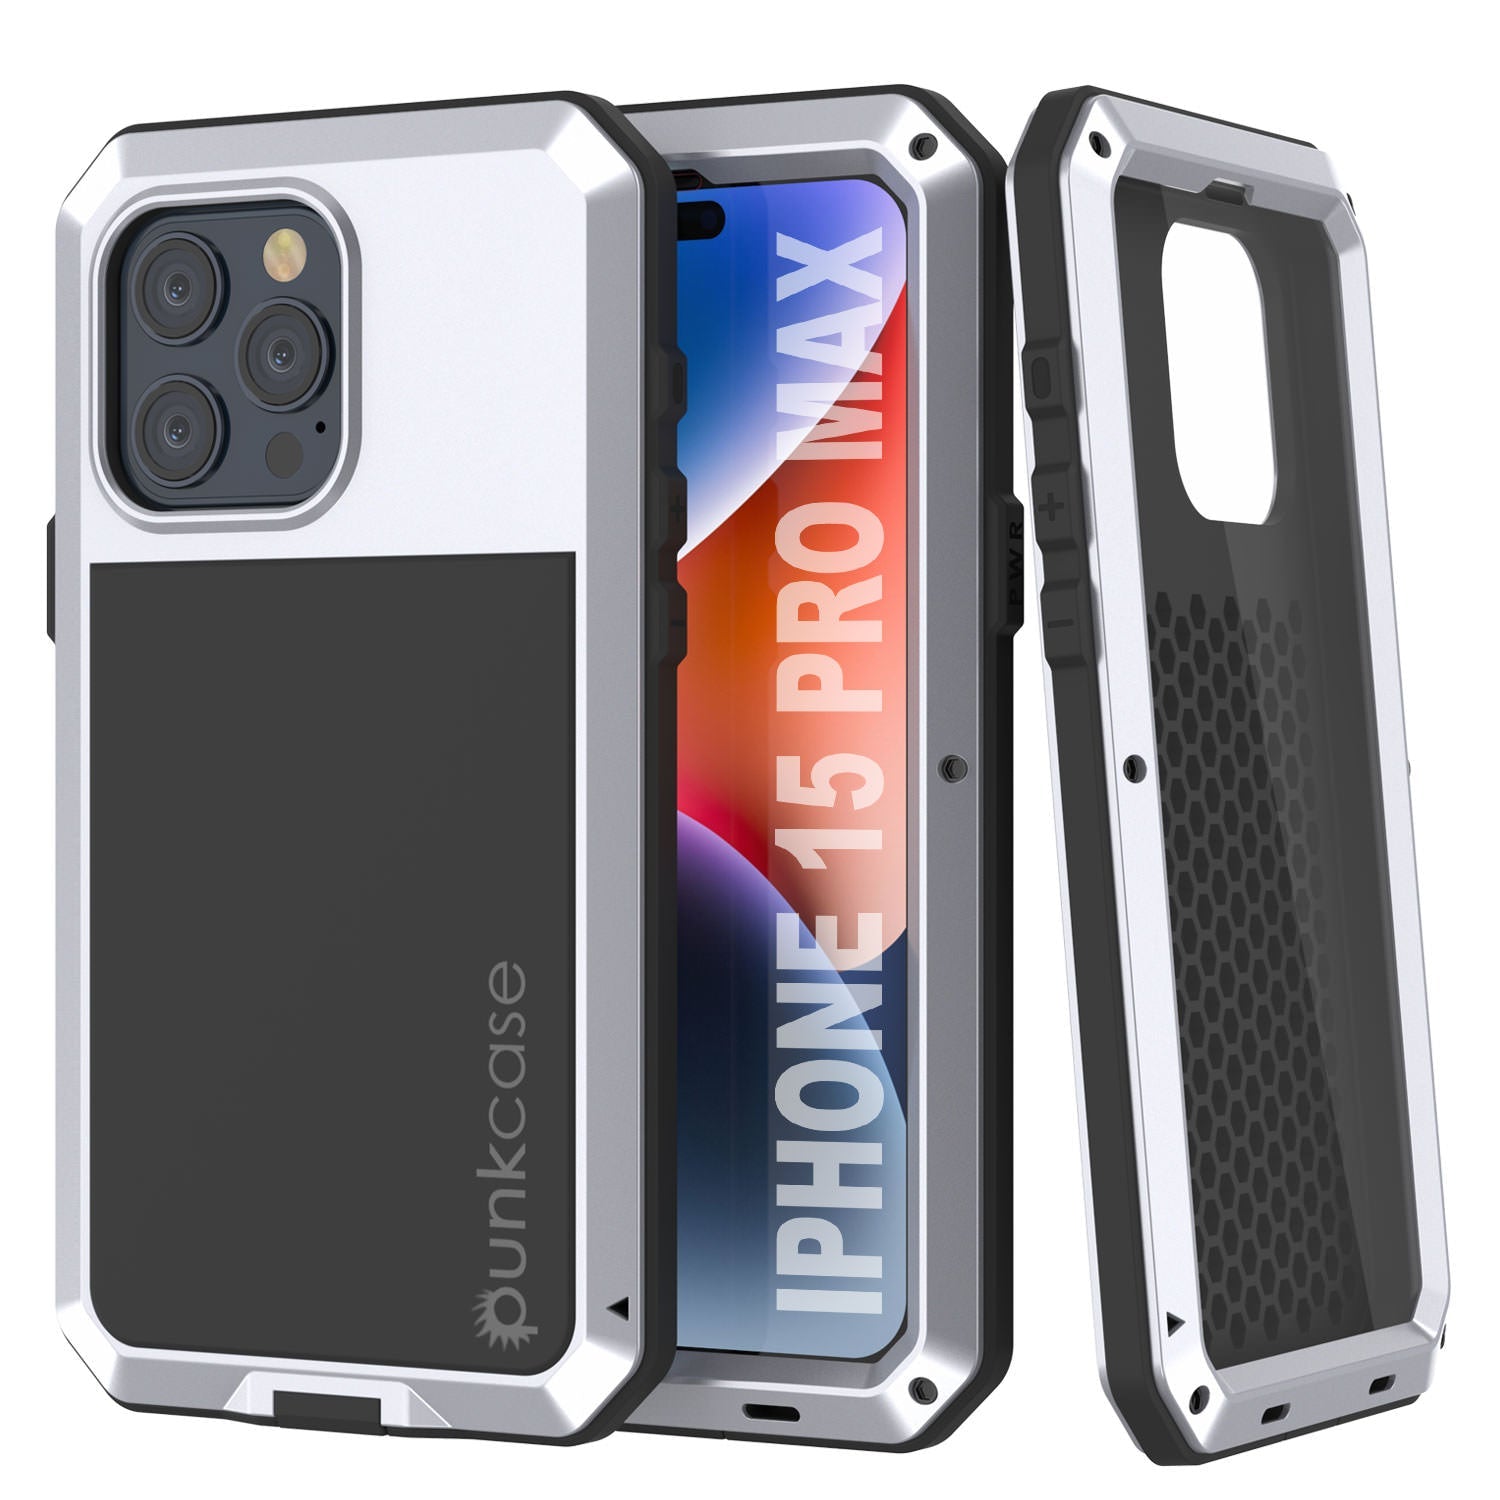 iPhone 15 Pro Max Metal Case, Heavy Duty Military Grade Armor Cover [shock proof] Full Body Hard [White]